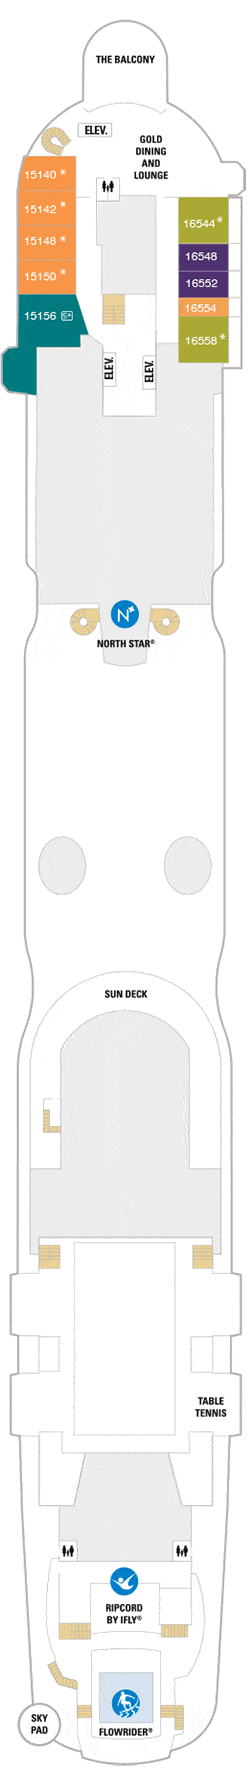 pages.ship.deckPlan